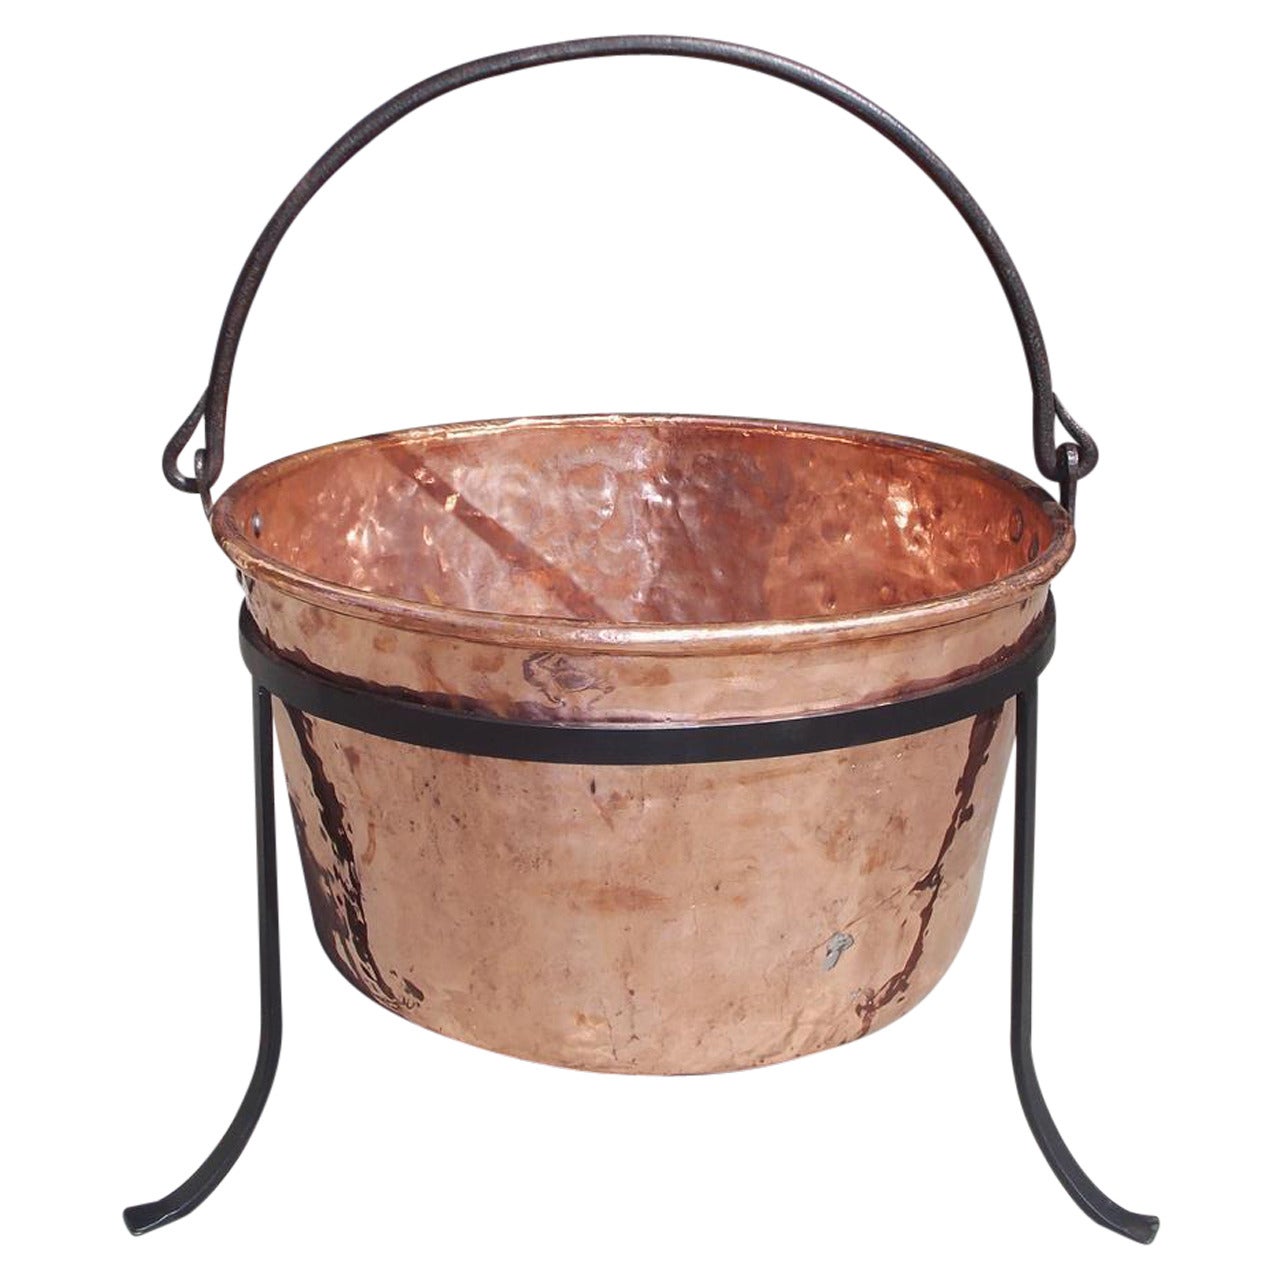 American Copper and Wrought Iron Plantation Cauldron on Stand, Circa 1780